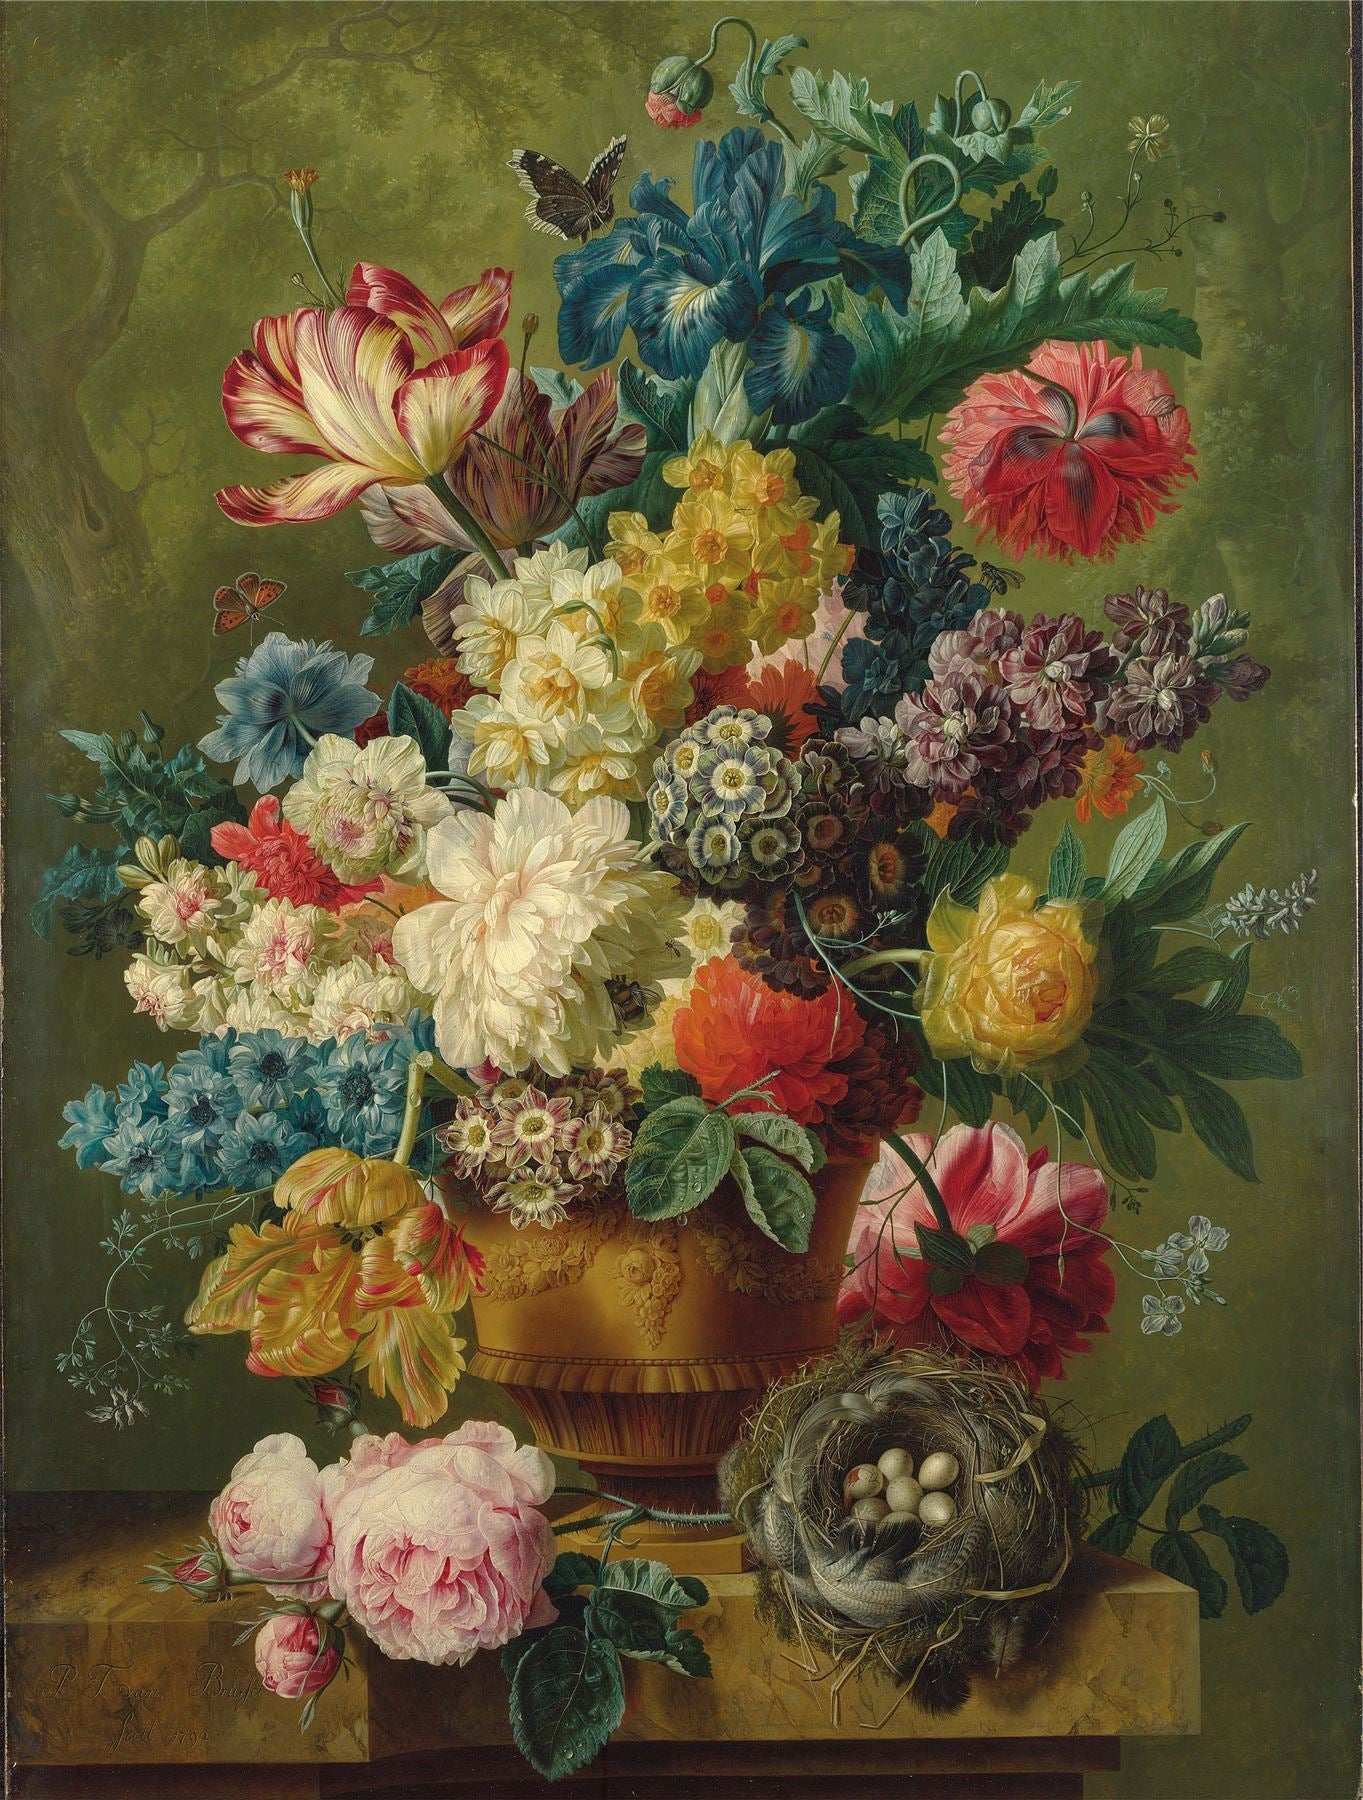 Flowers in a Vase - National Gallery 1000 Piece Jigsaw Puzzle